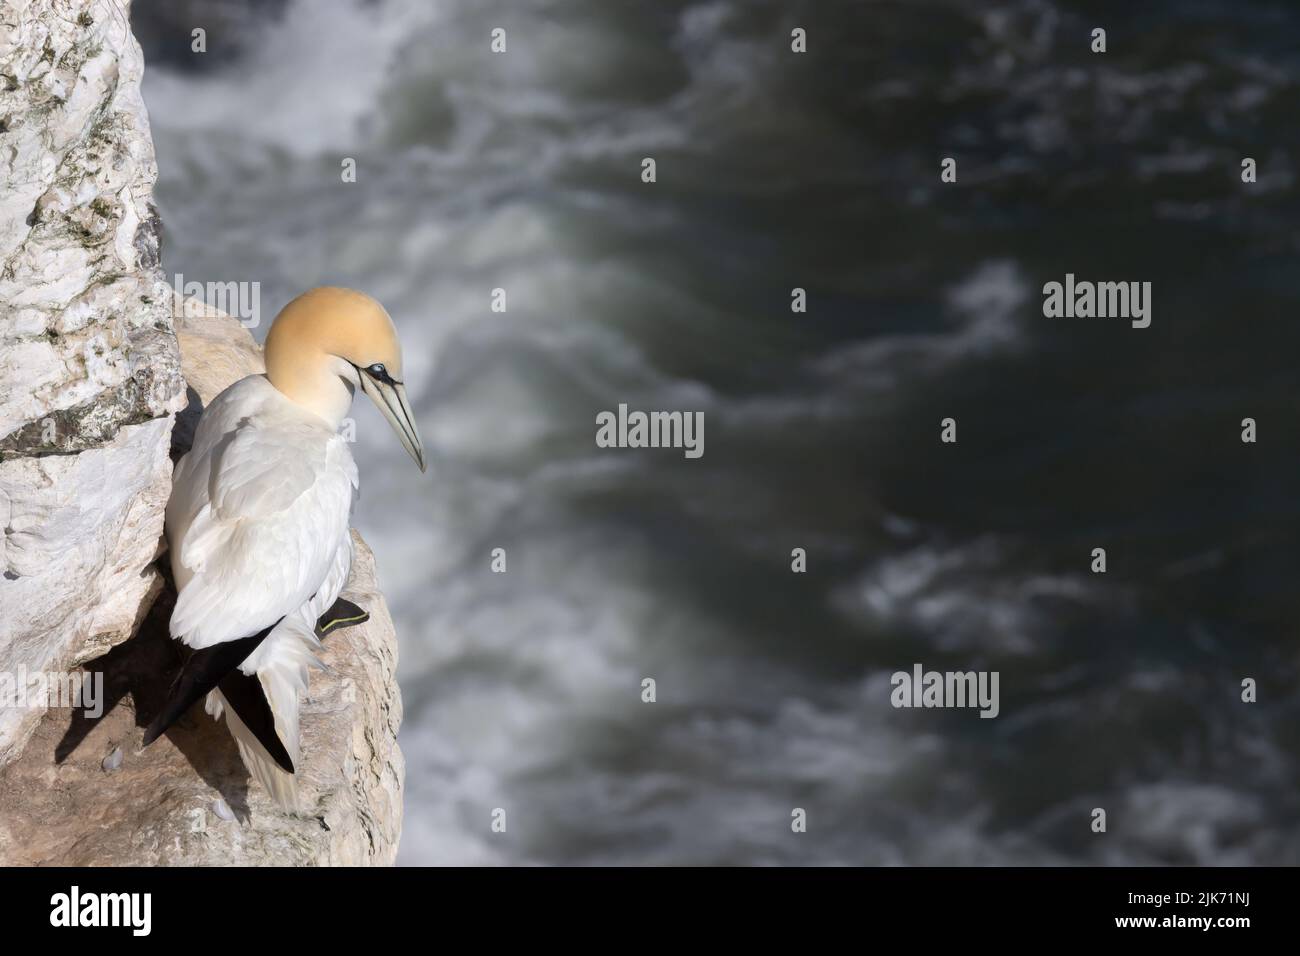 Close up of a Northern gannet (Morus bassana) perched on an edge of a cliff by the North sea, Bempton cliffs, UK. Stock Photo